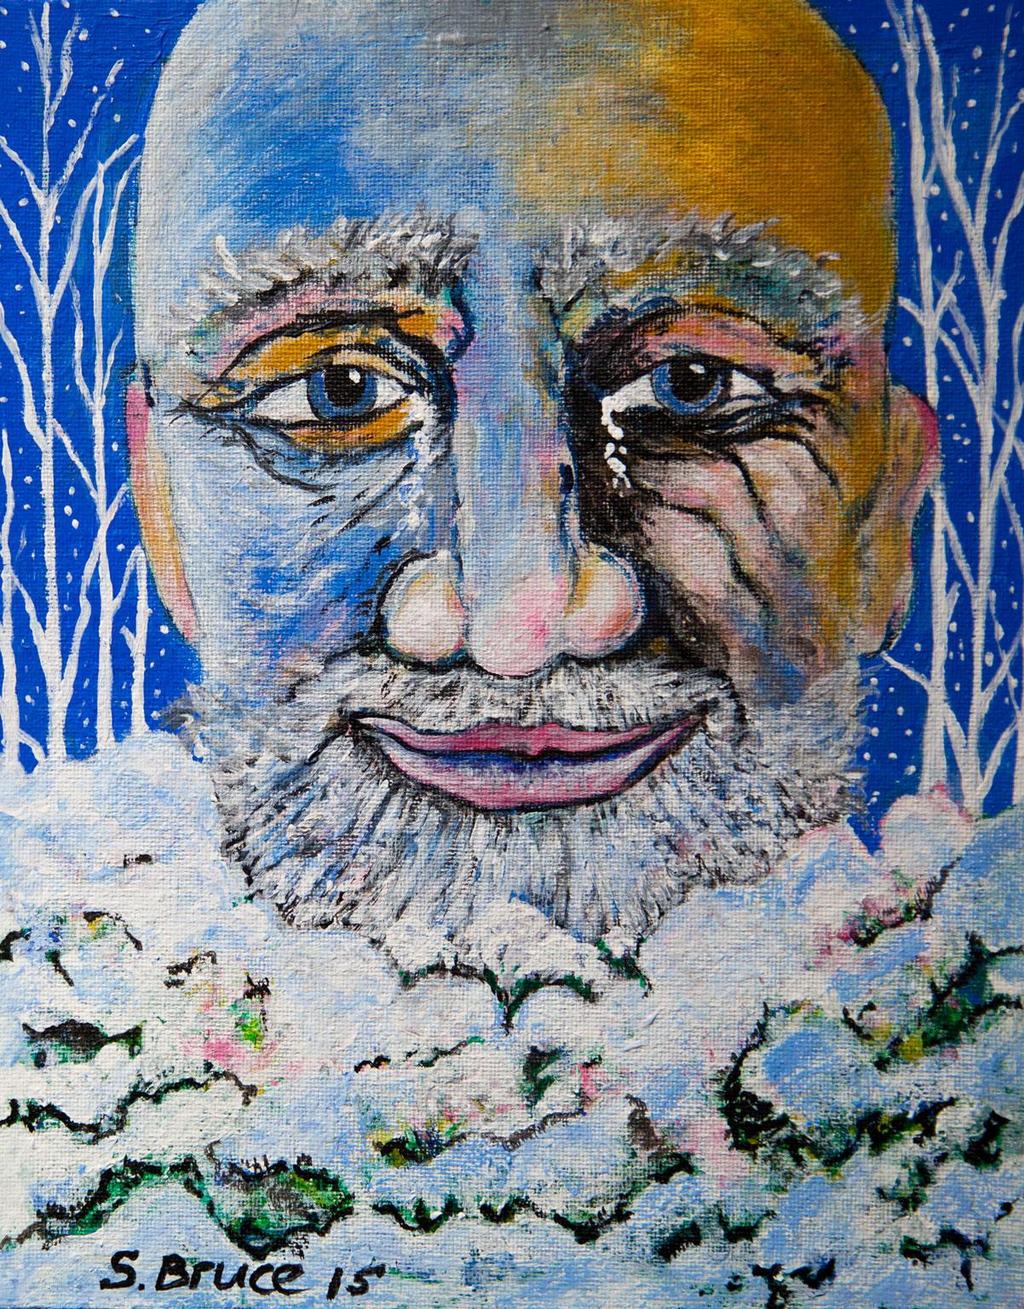 7 A painting by Stephen Bruce inspired by the Selfish Giant. Some questions to ask children: Why is the giants face blue? Why is one side of his face turning pink and yellow?